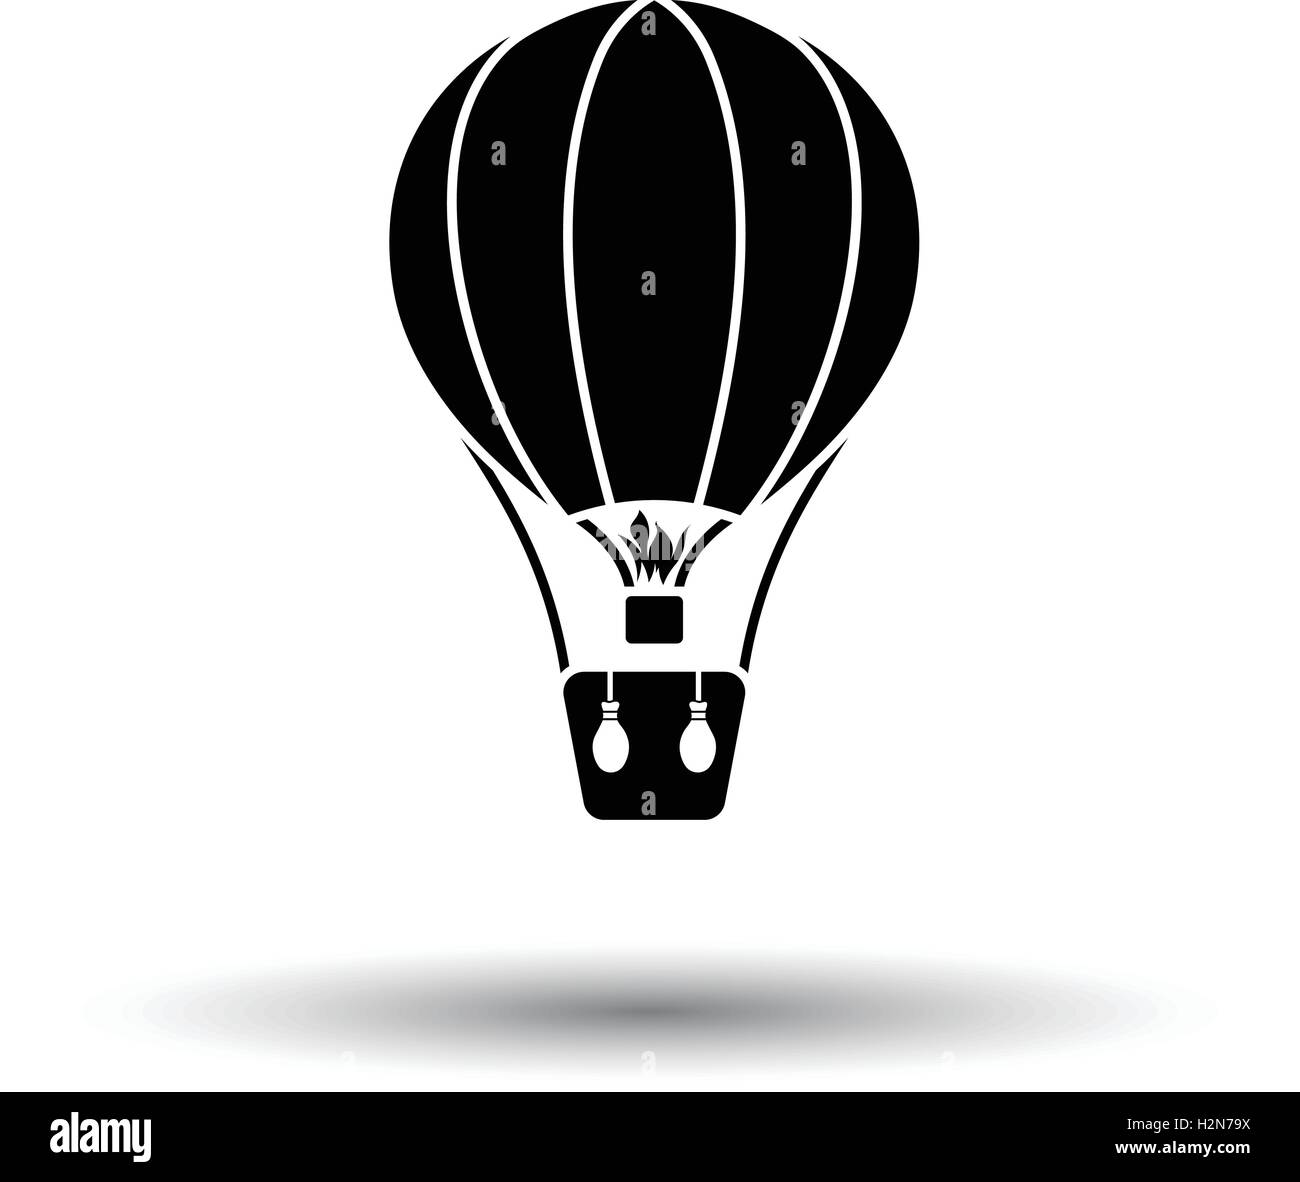 Hot air balloon icon. White background with shadow design. Vector illustration. Stock Vector